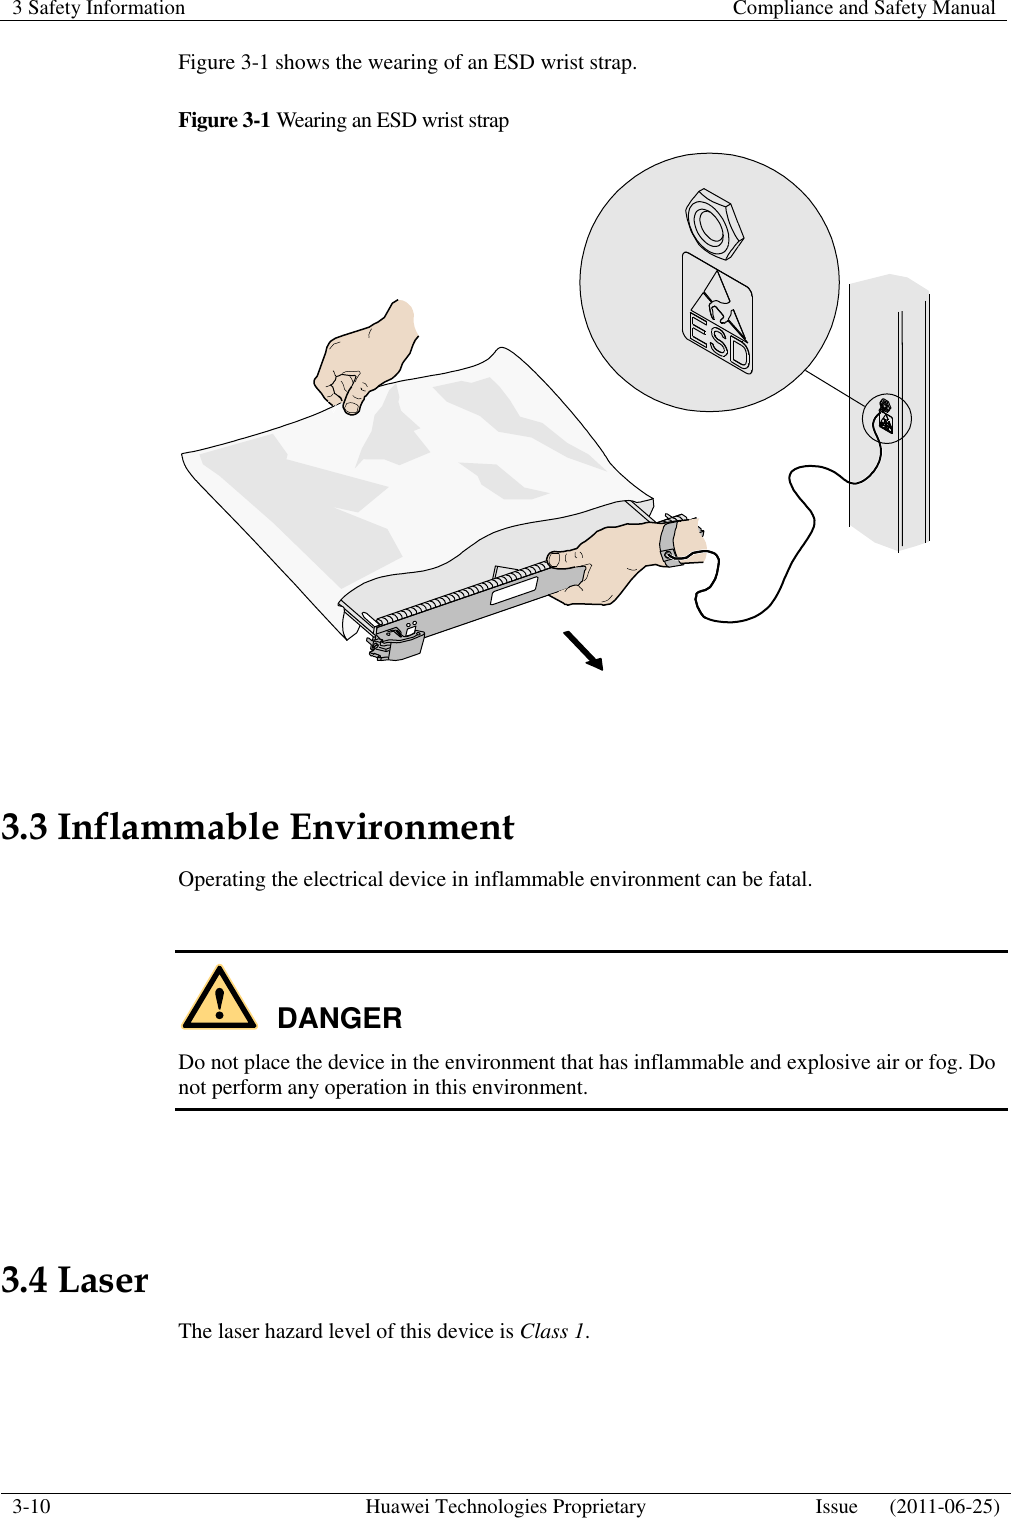 3 Safety Information    Compliance and Safety Manual  3-10 Huawei Technologies Proprietary Issue      (2011-06-25)  Figure 3-1 shows the wearing of an ESD wrist strap. Figure 3-1 Wearing an ESD wrist strap   3.3 Inflammable Environment Operating the electrical device in inflammable environment can be fatal.  DANGER Do not place the device in the environment that has inflammable and explosive air or fog. Do not perform any operation in this environment.   3.4 Laser The laser hazard level of this device is Class 1.  